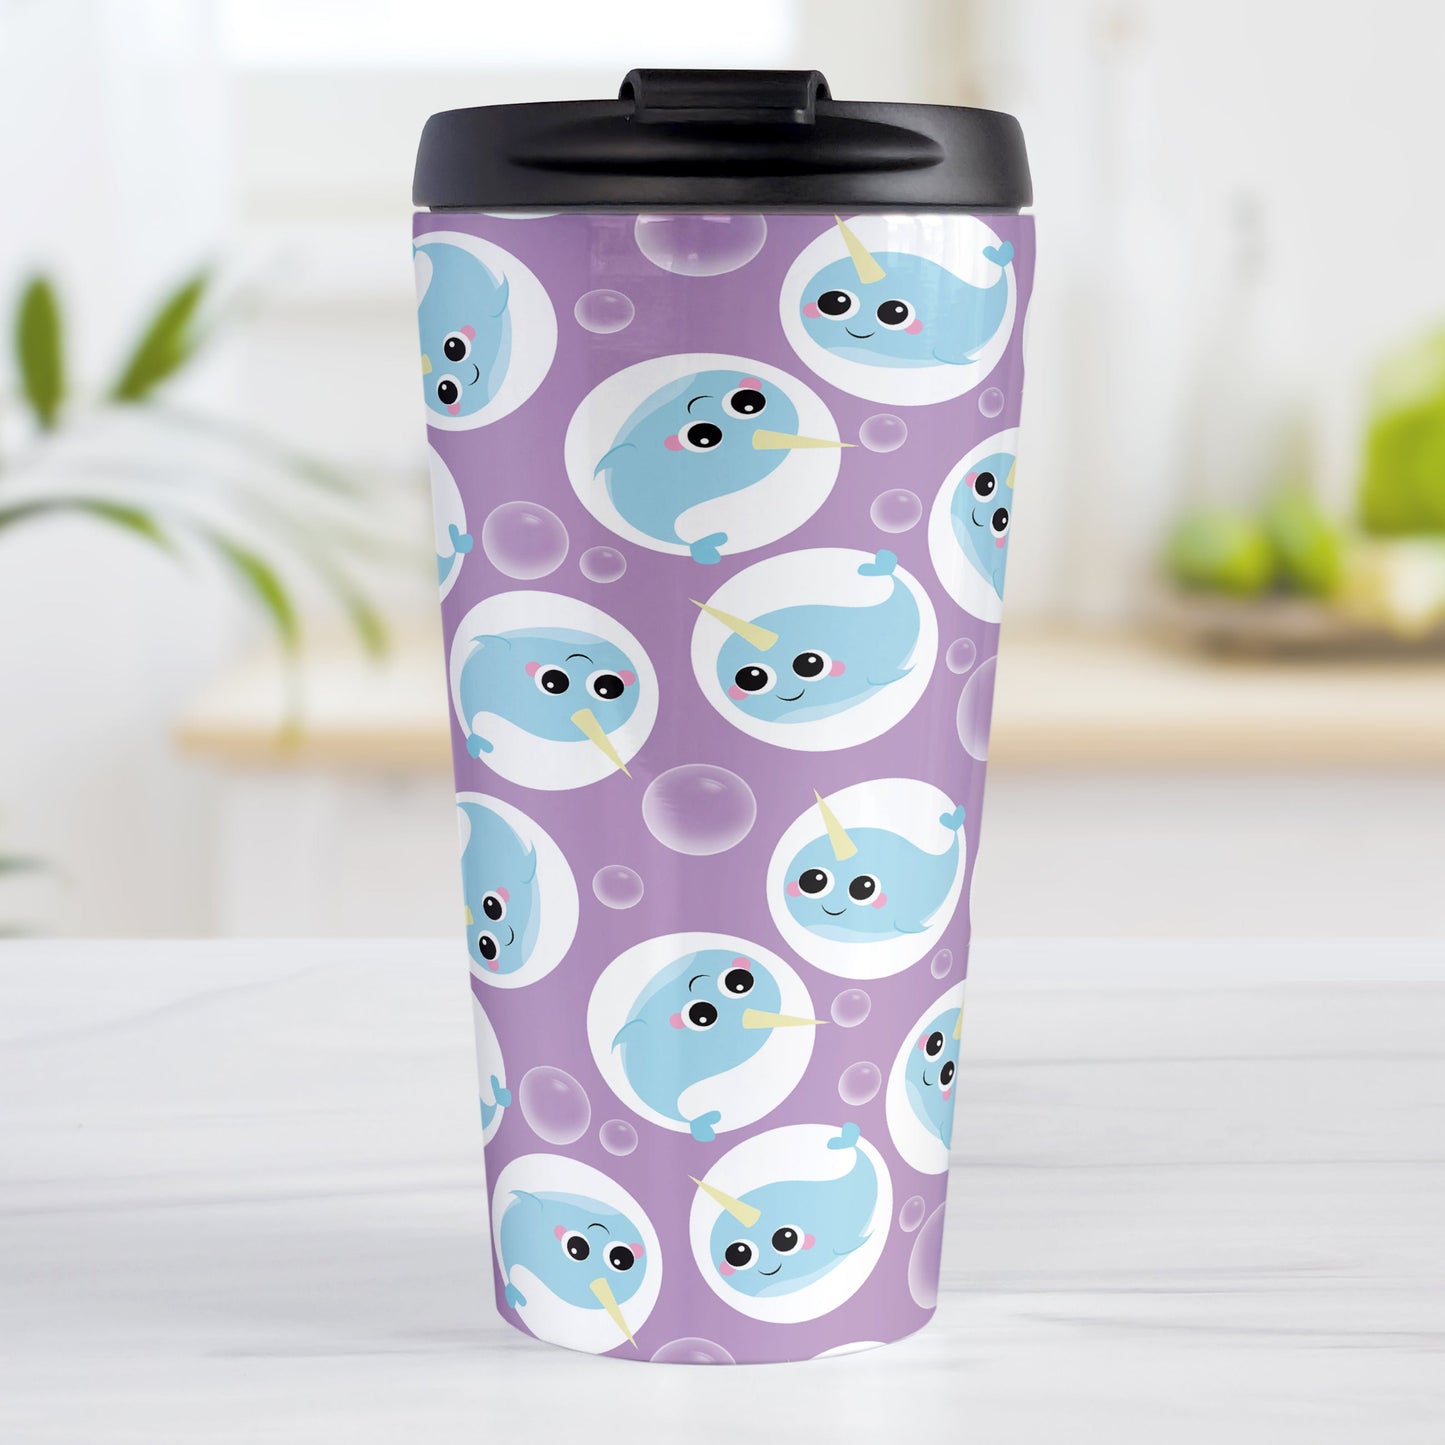 Cute Purple Narwhal Bubble Pattern Travel Mug (15oz, stainless steel insulated) at Amy's Coffee Mugs